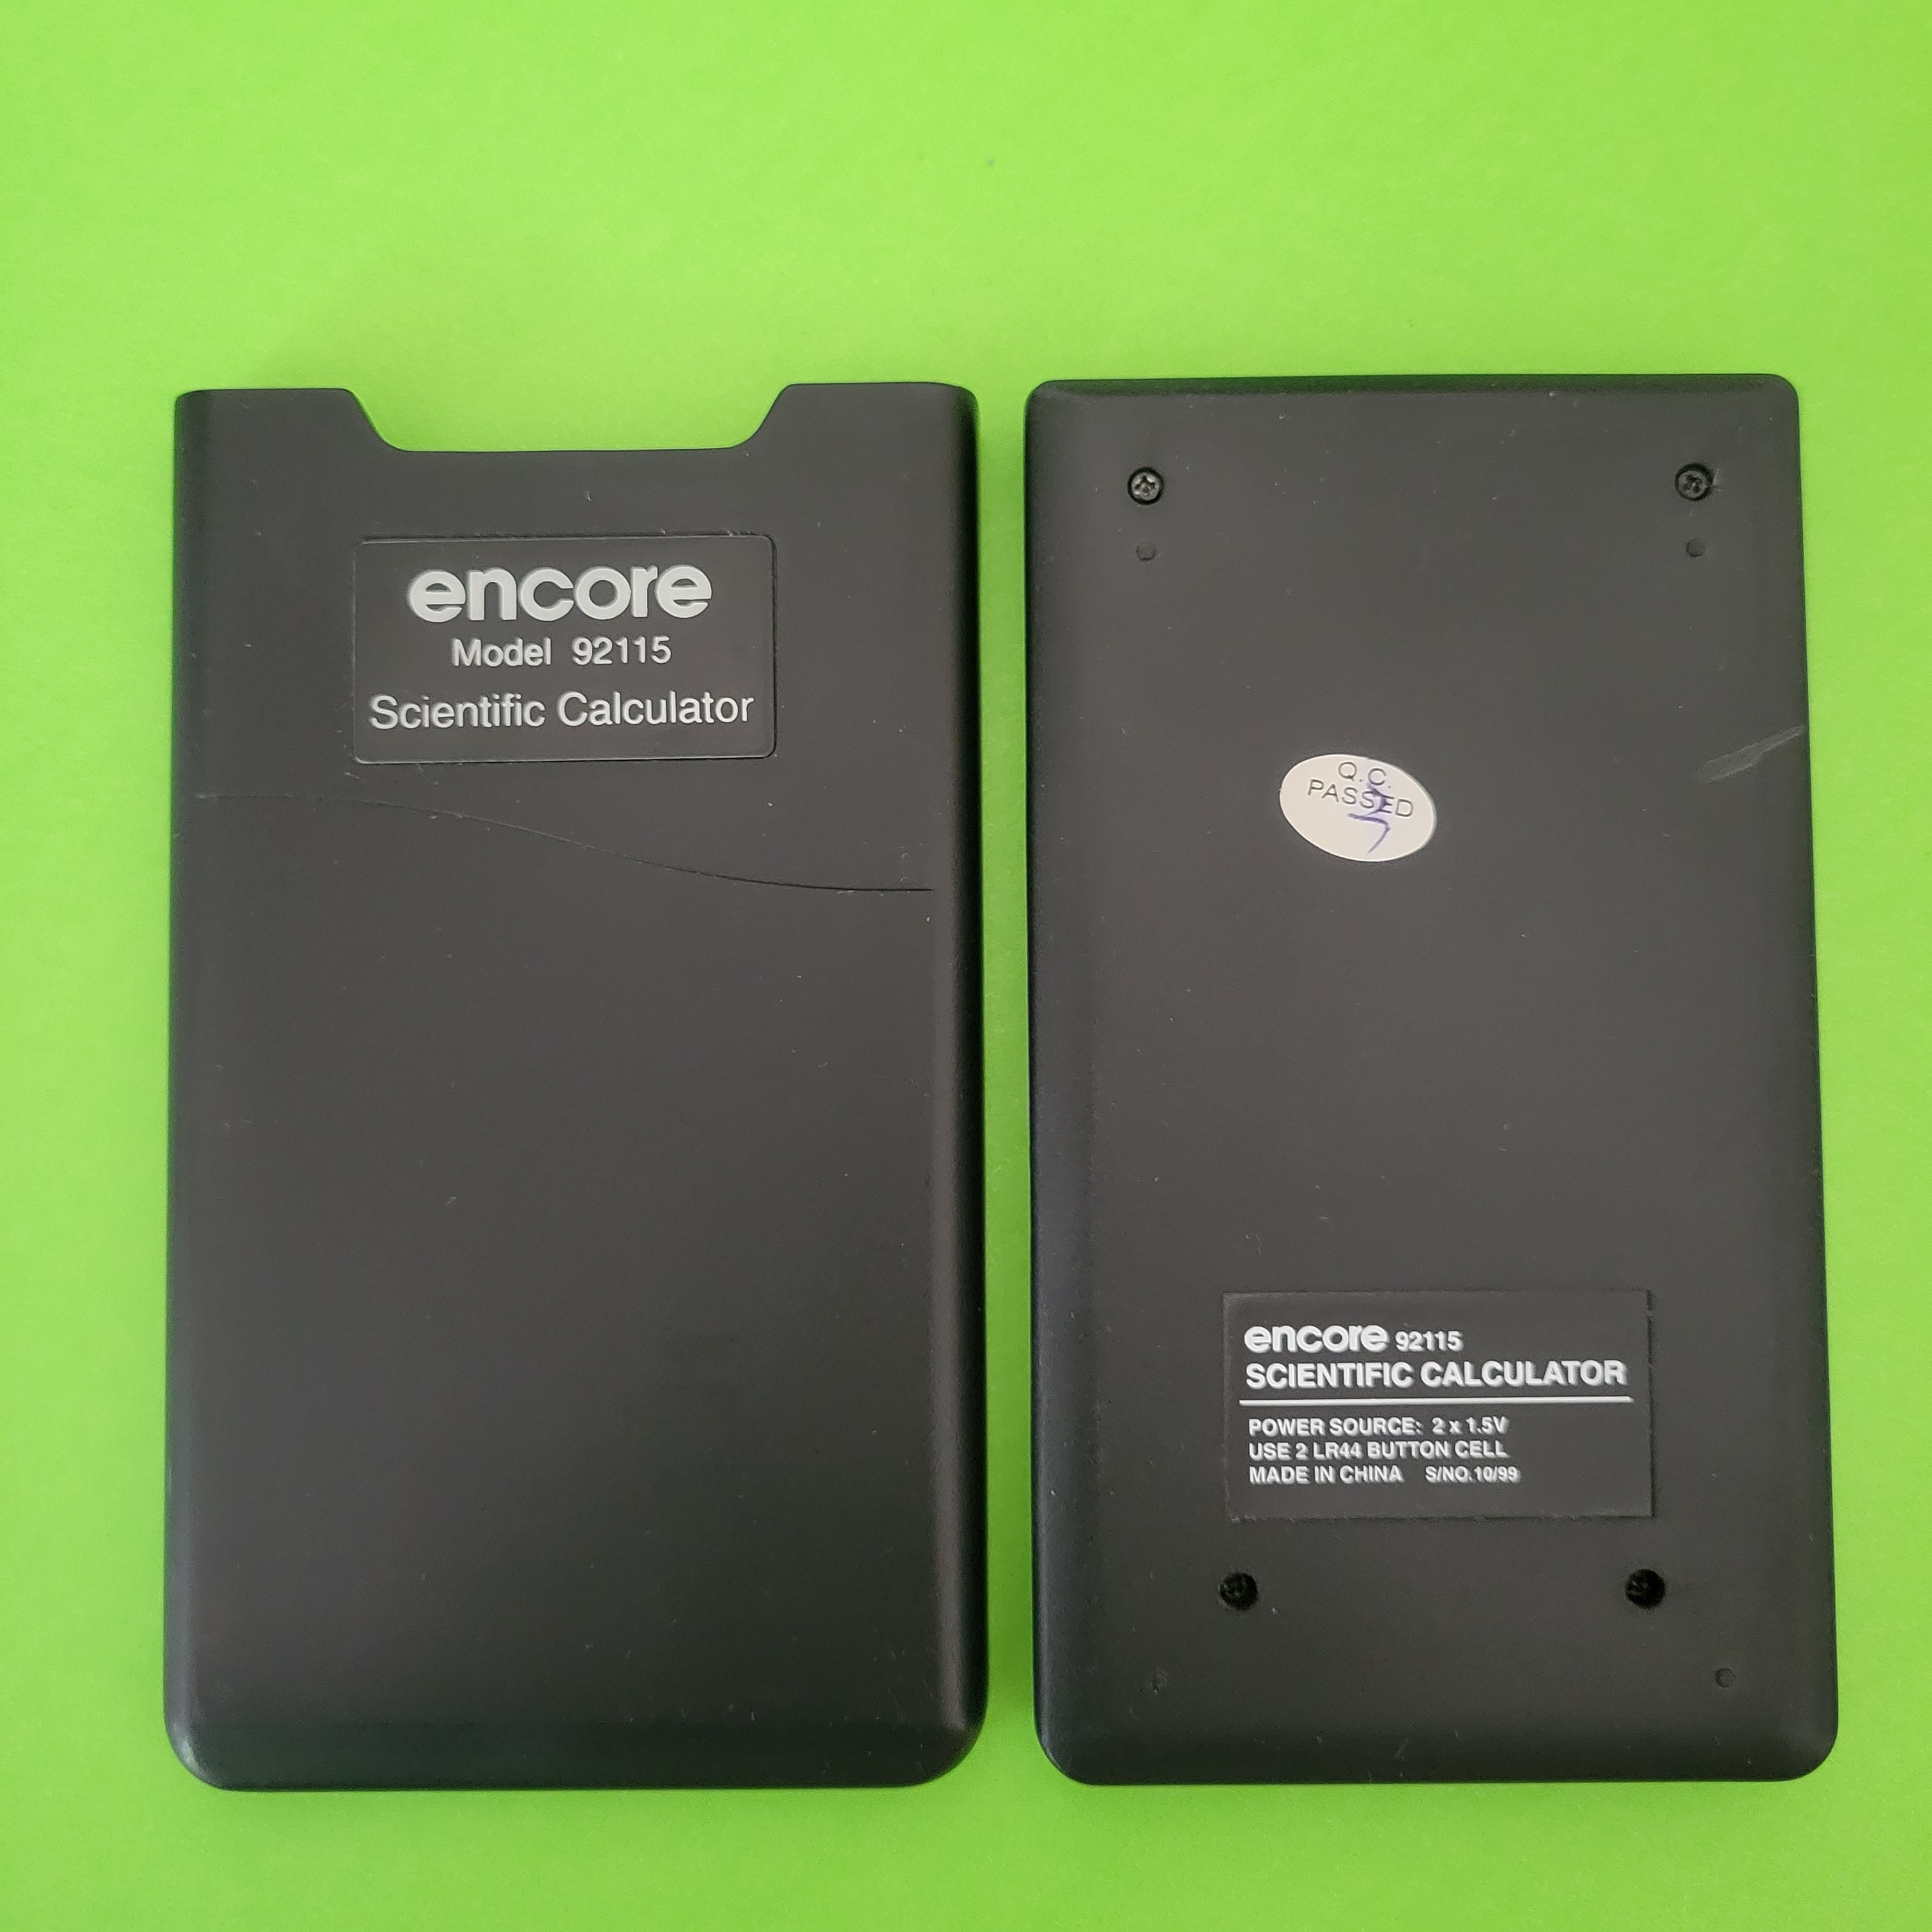 An image of the back of a encore 92115 scientific/engineering calculator